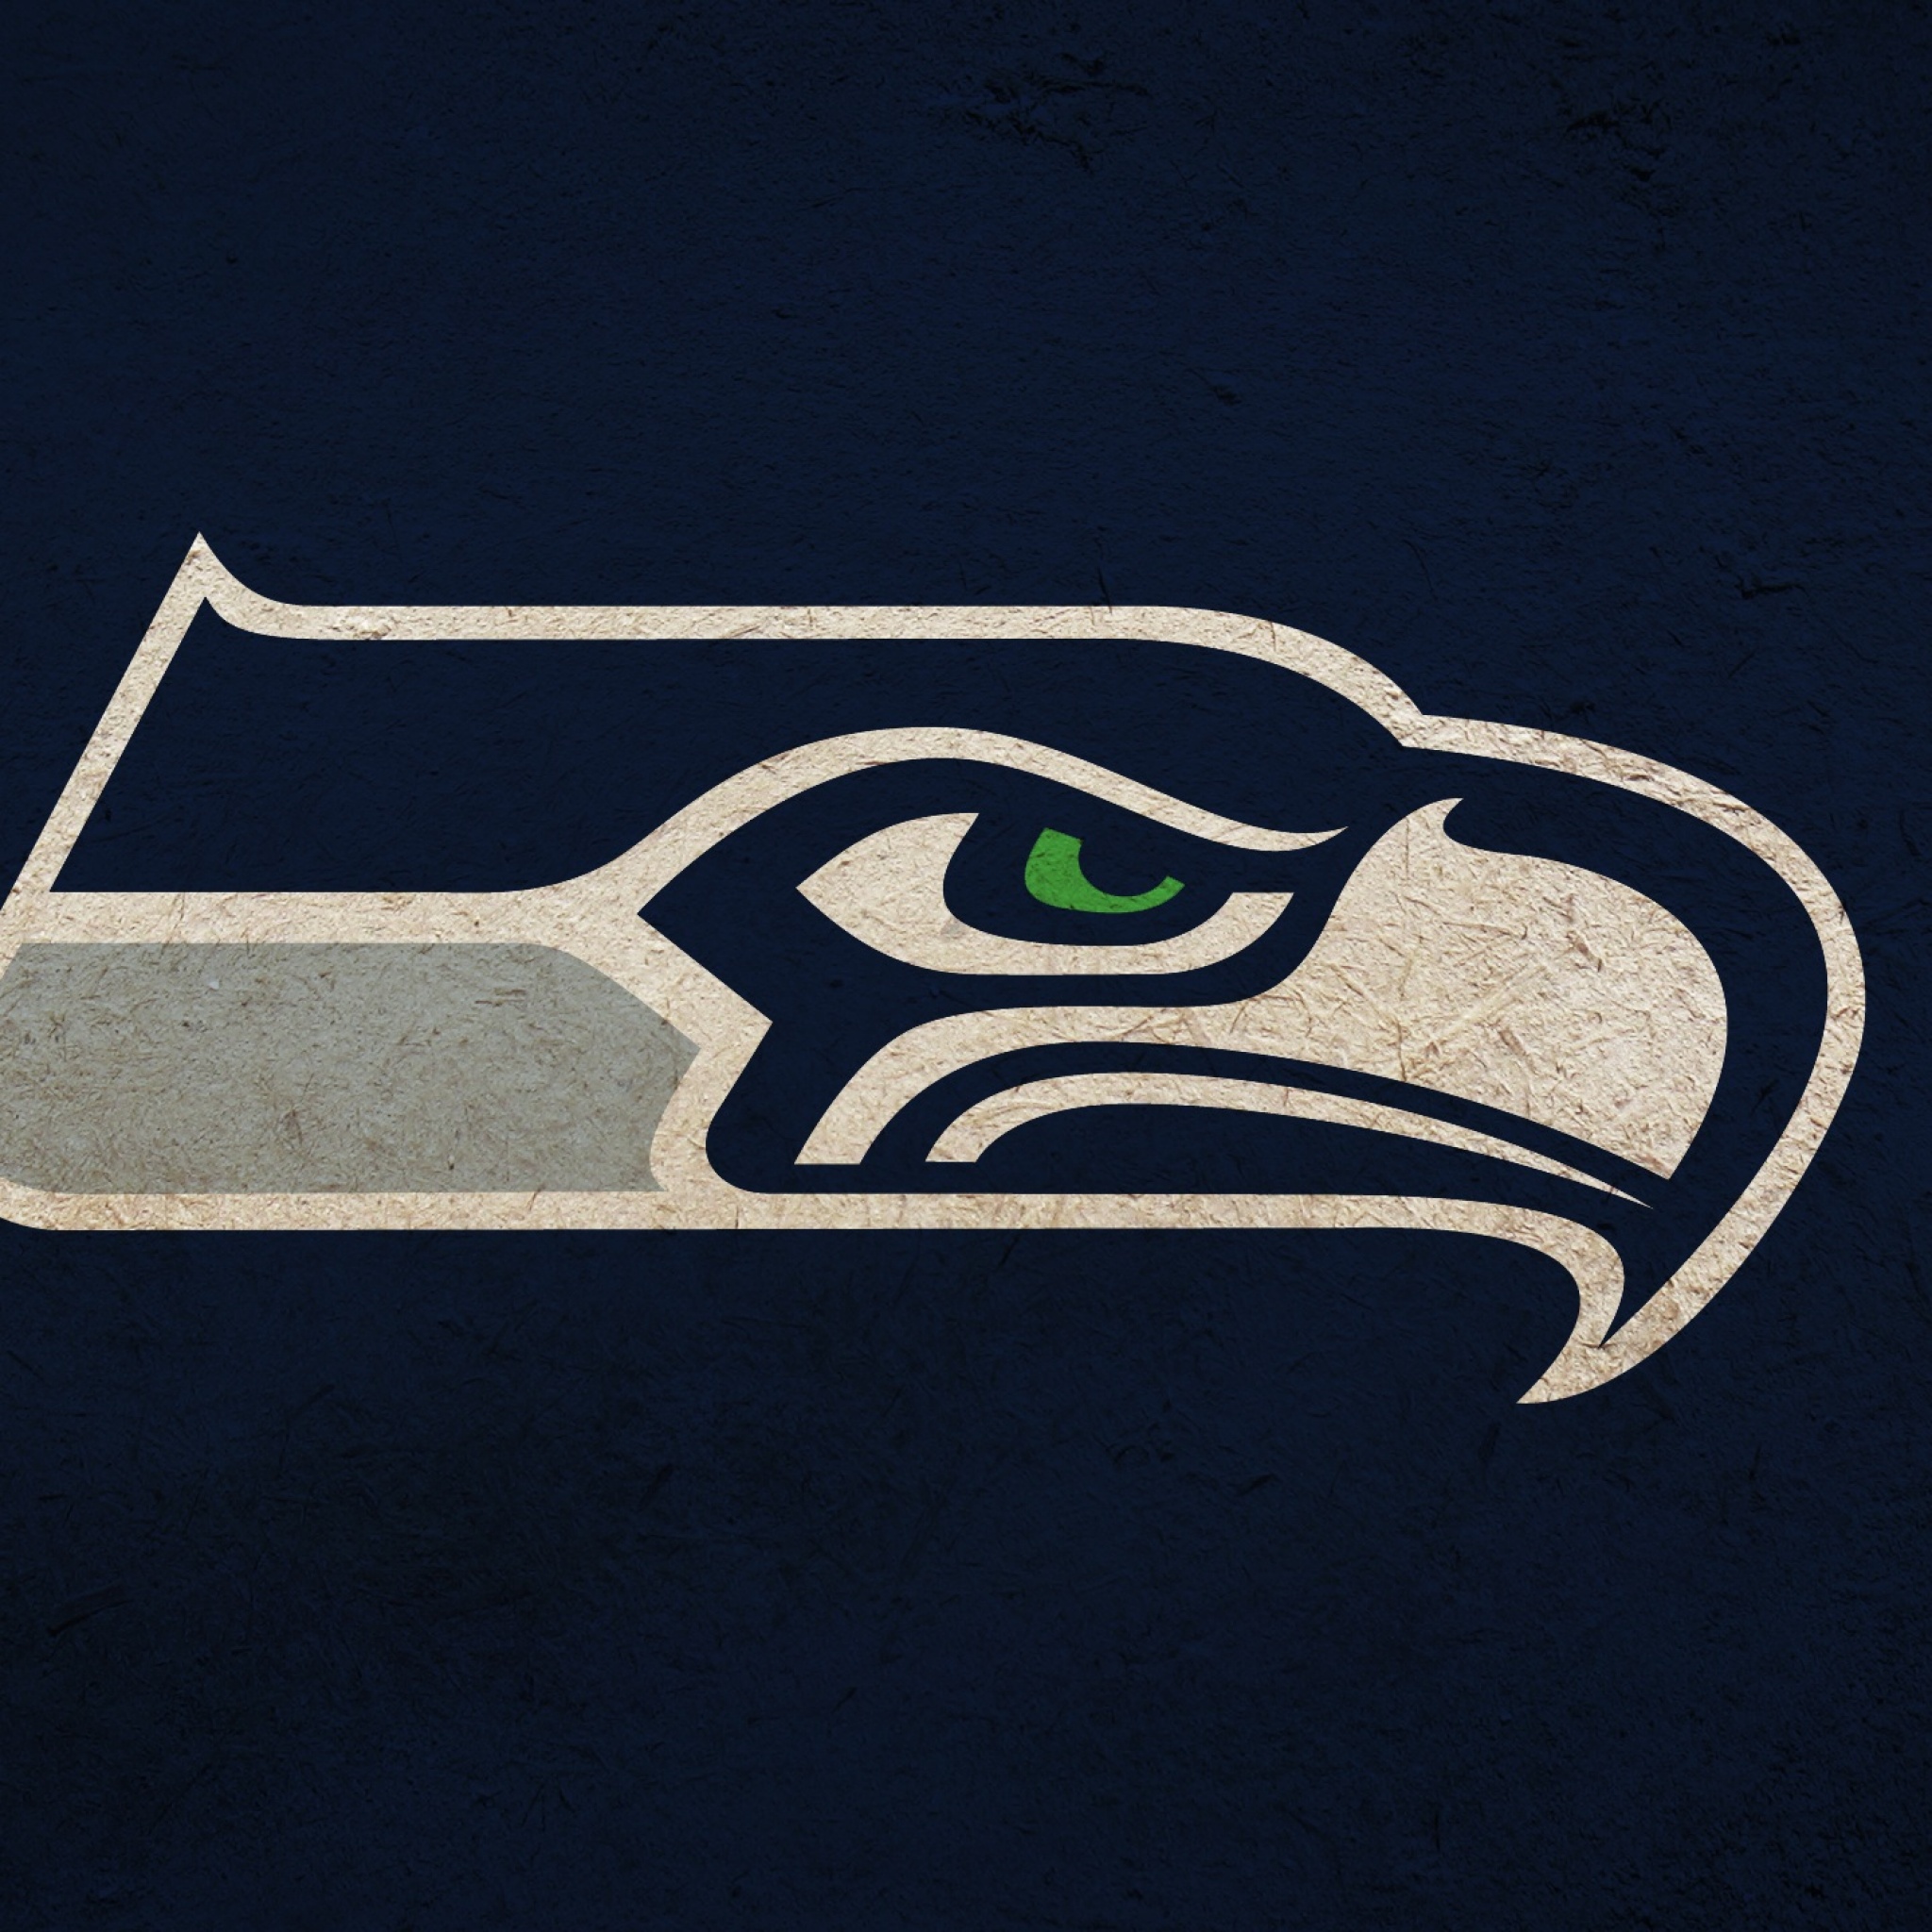 Superbowl Xlix Wallpaper For iPhone And iPad